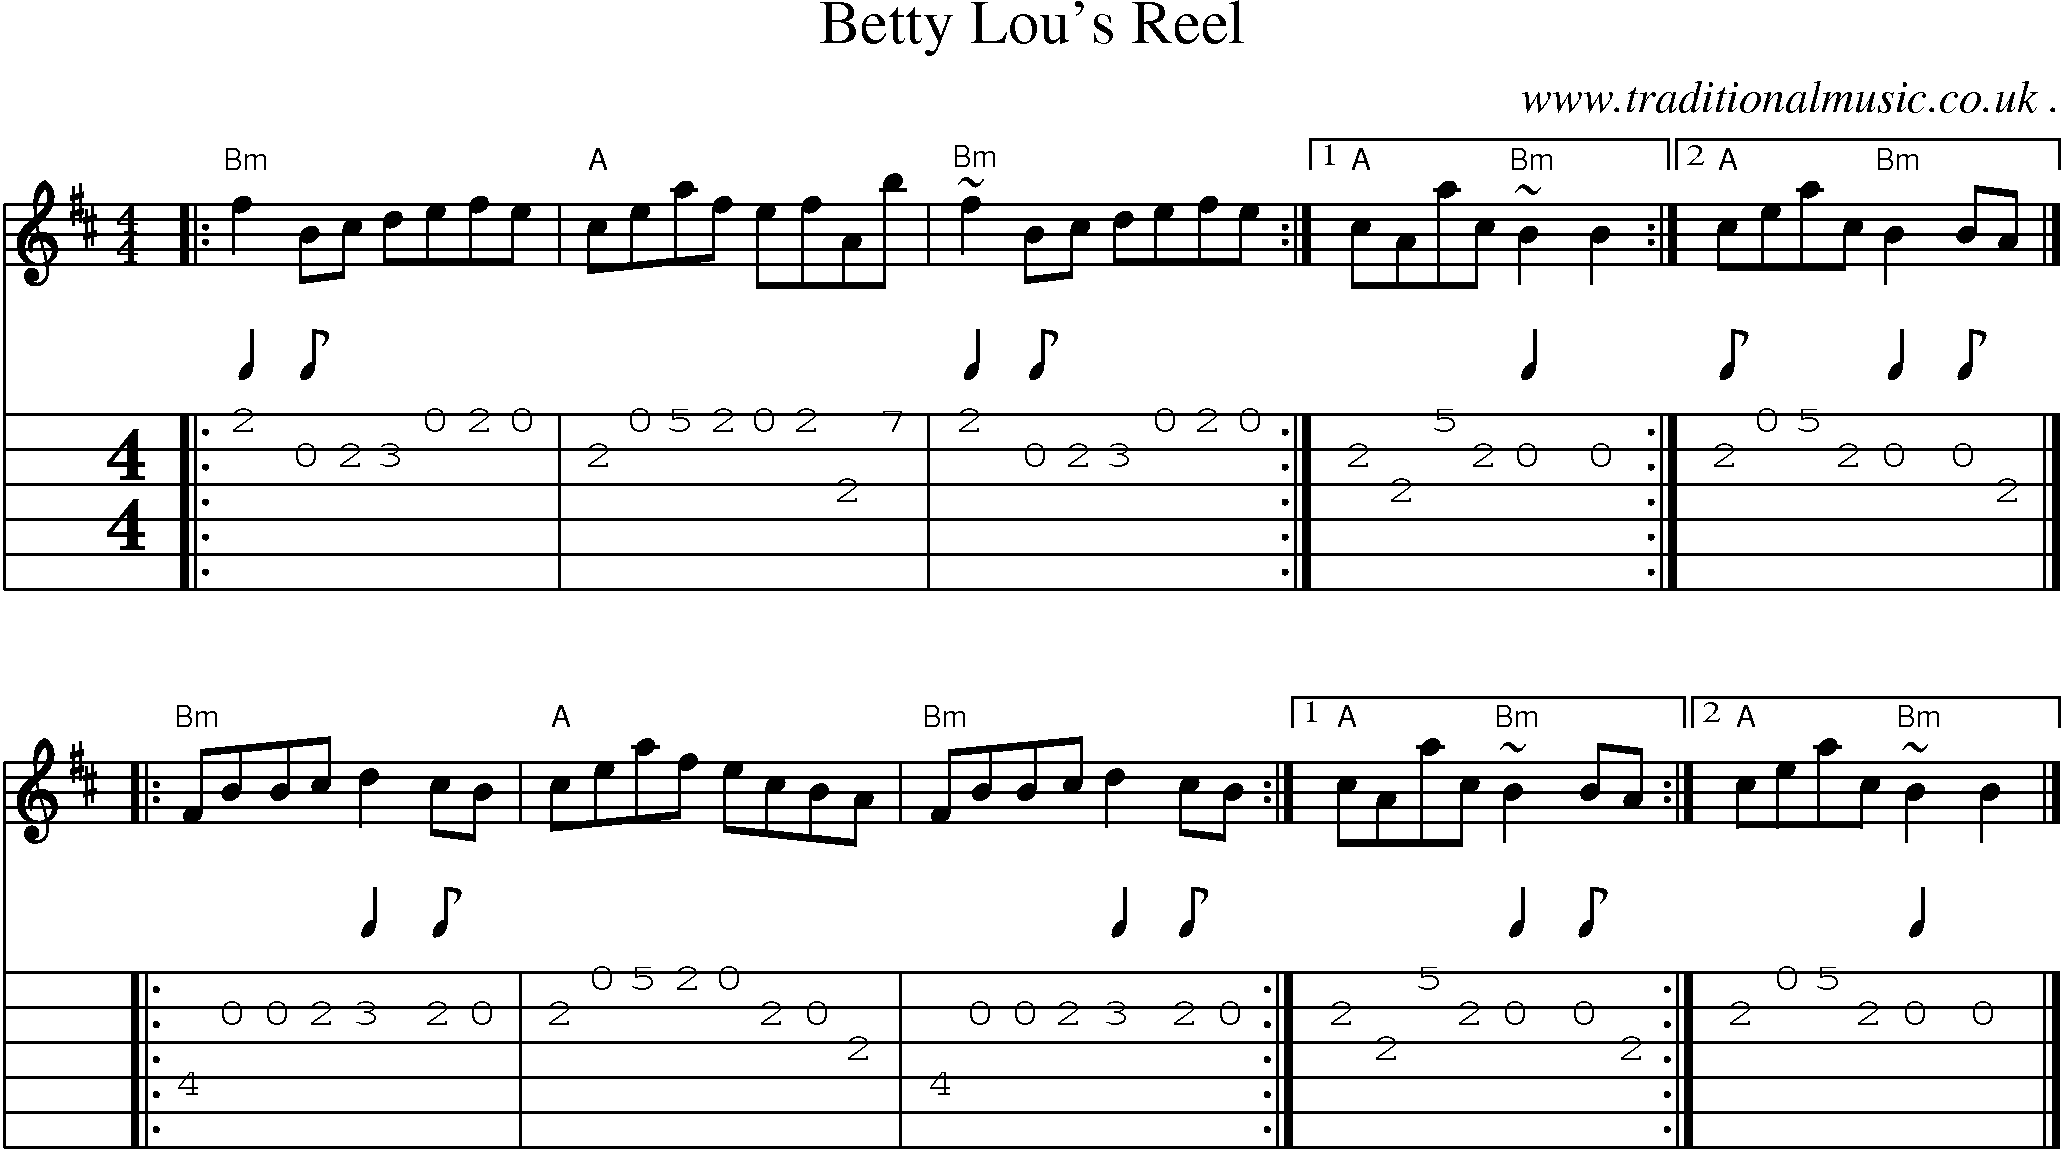 Sheet-music  score, Chords and Guitar Tabs for Betty Lous Reel